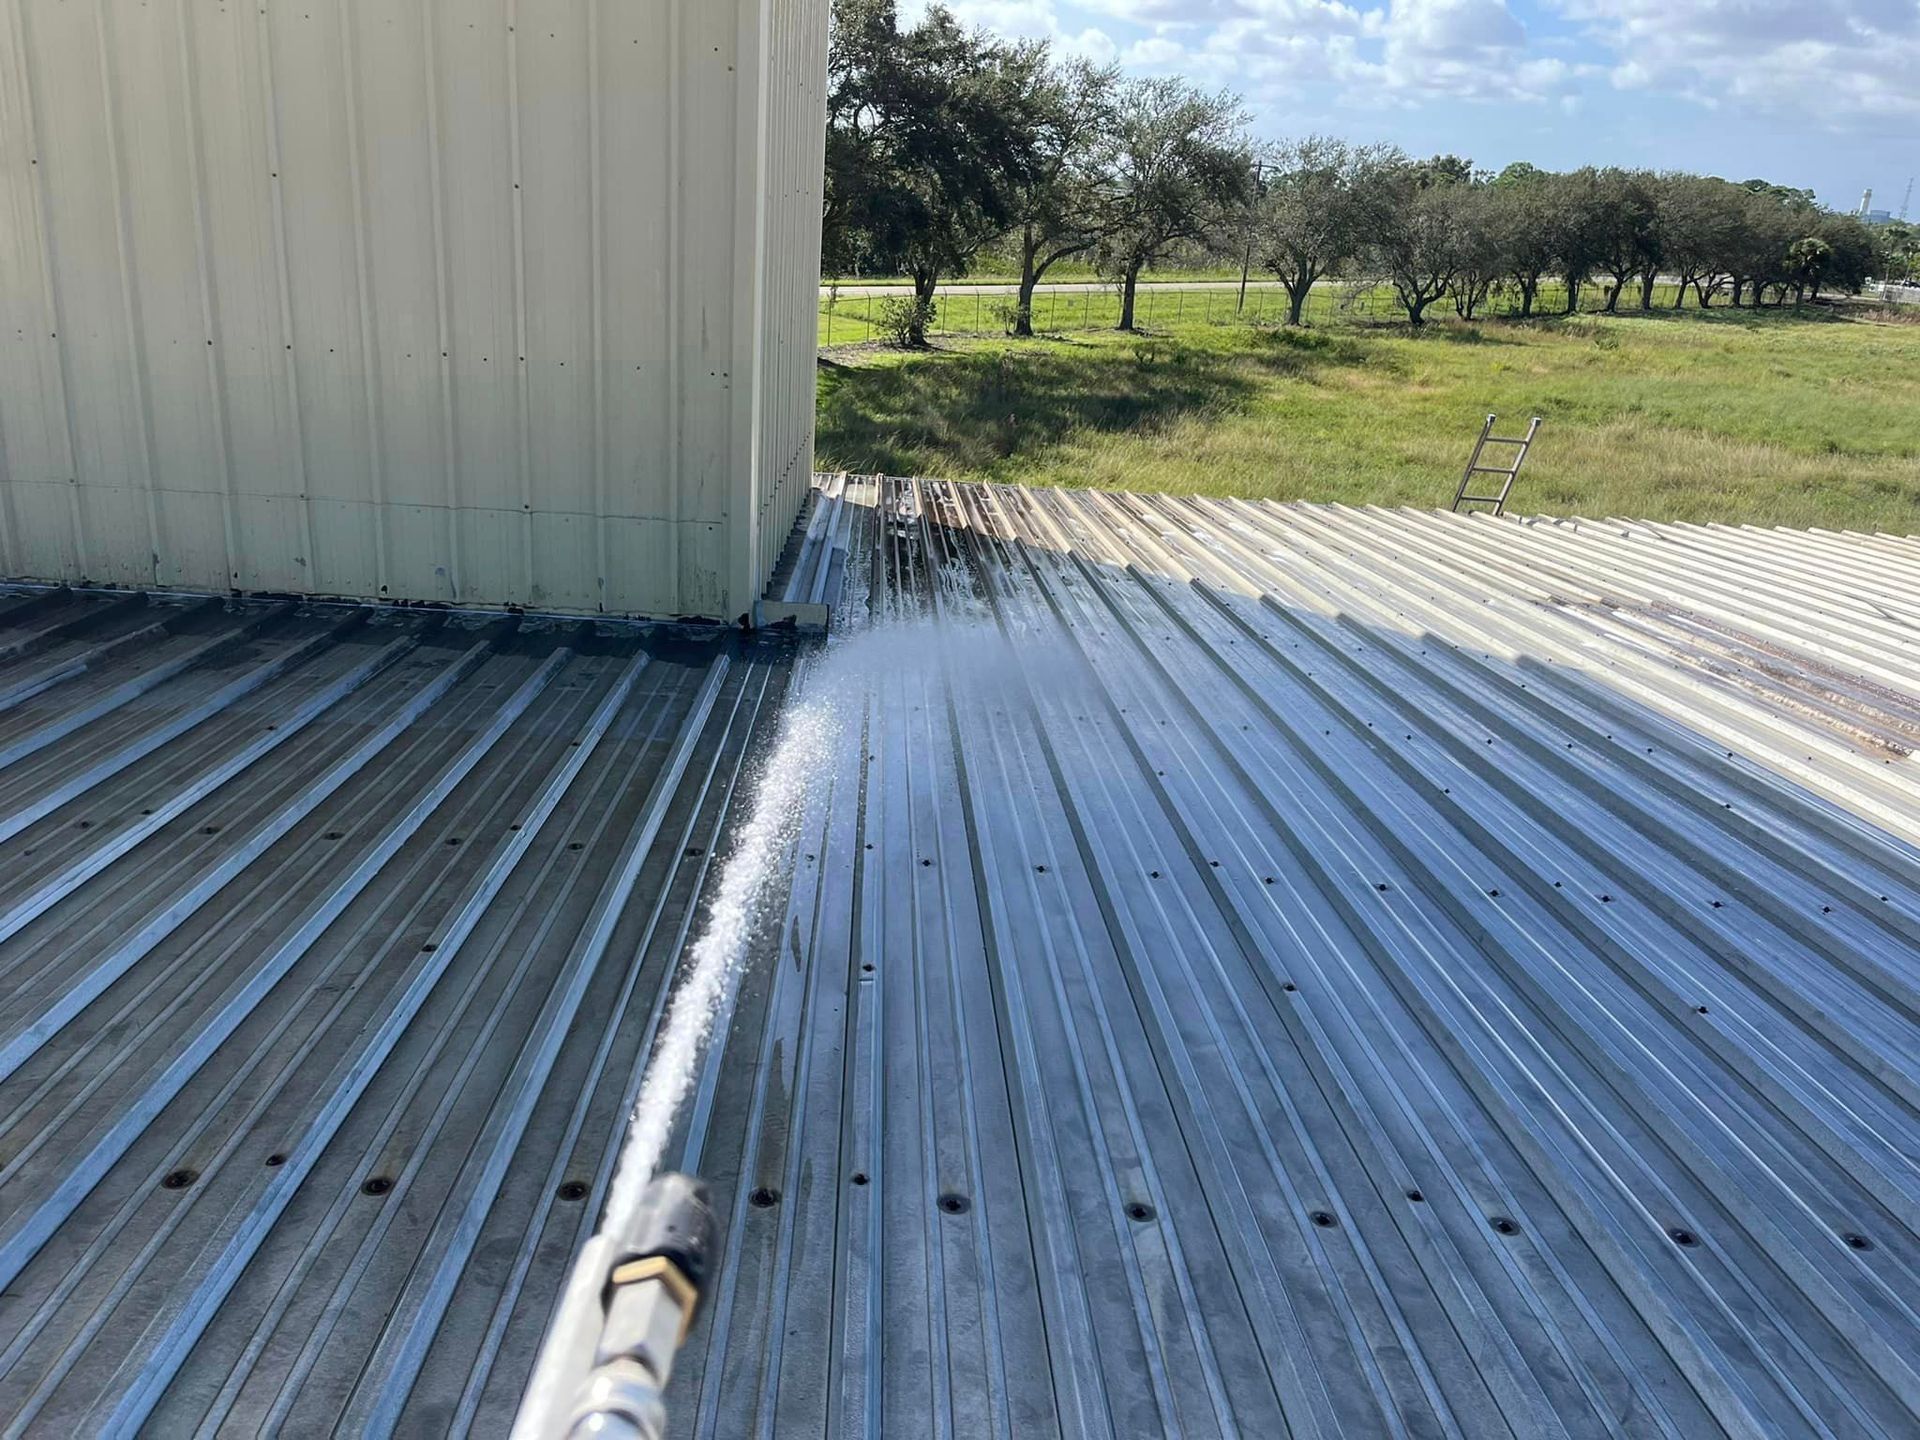 Image of RNR Pressure cleaning washing a metal roof 